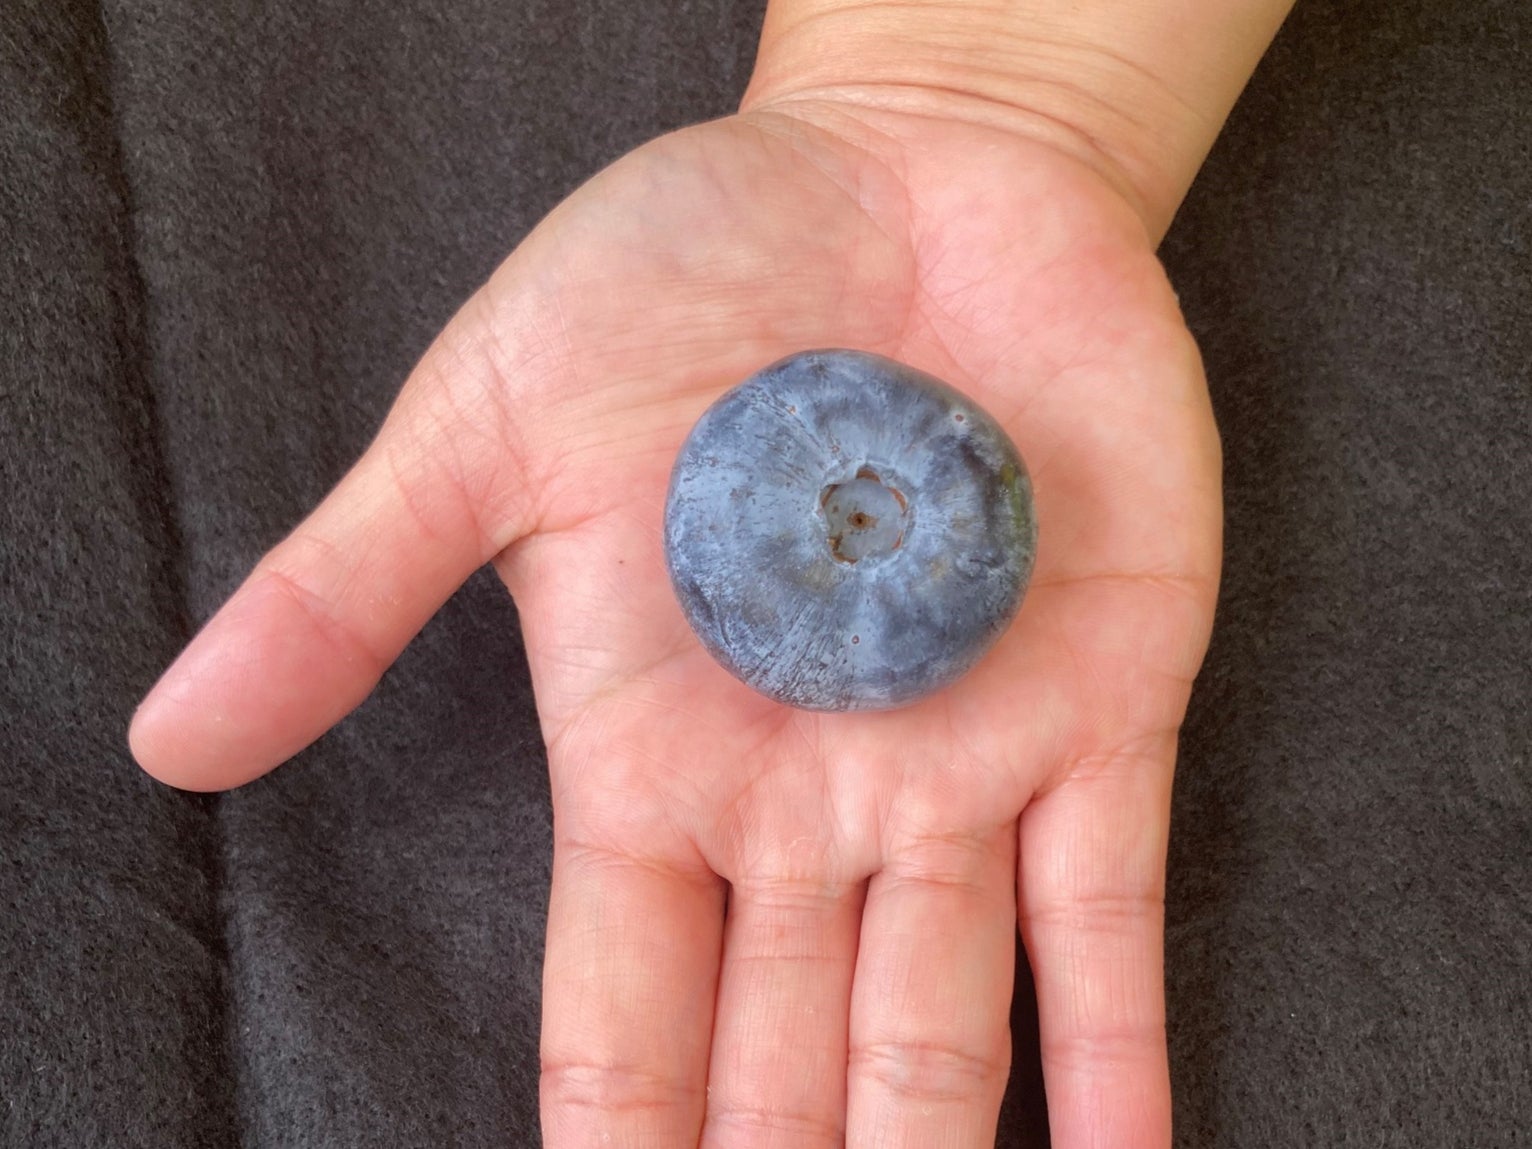 The Guinness World Record-breaking berry from Costa weighs 10 times more than a normal blueberry